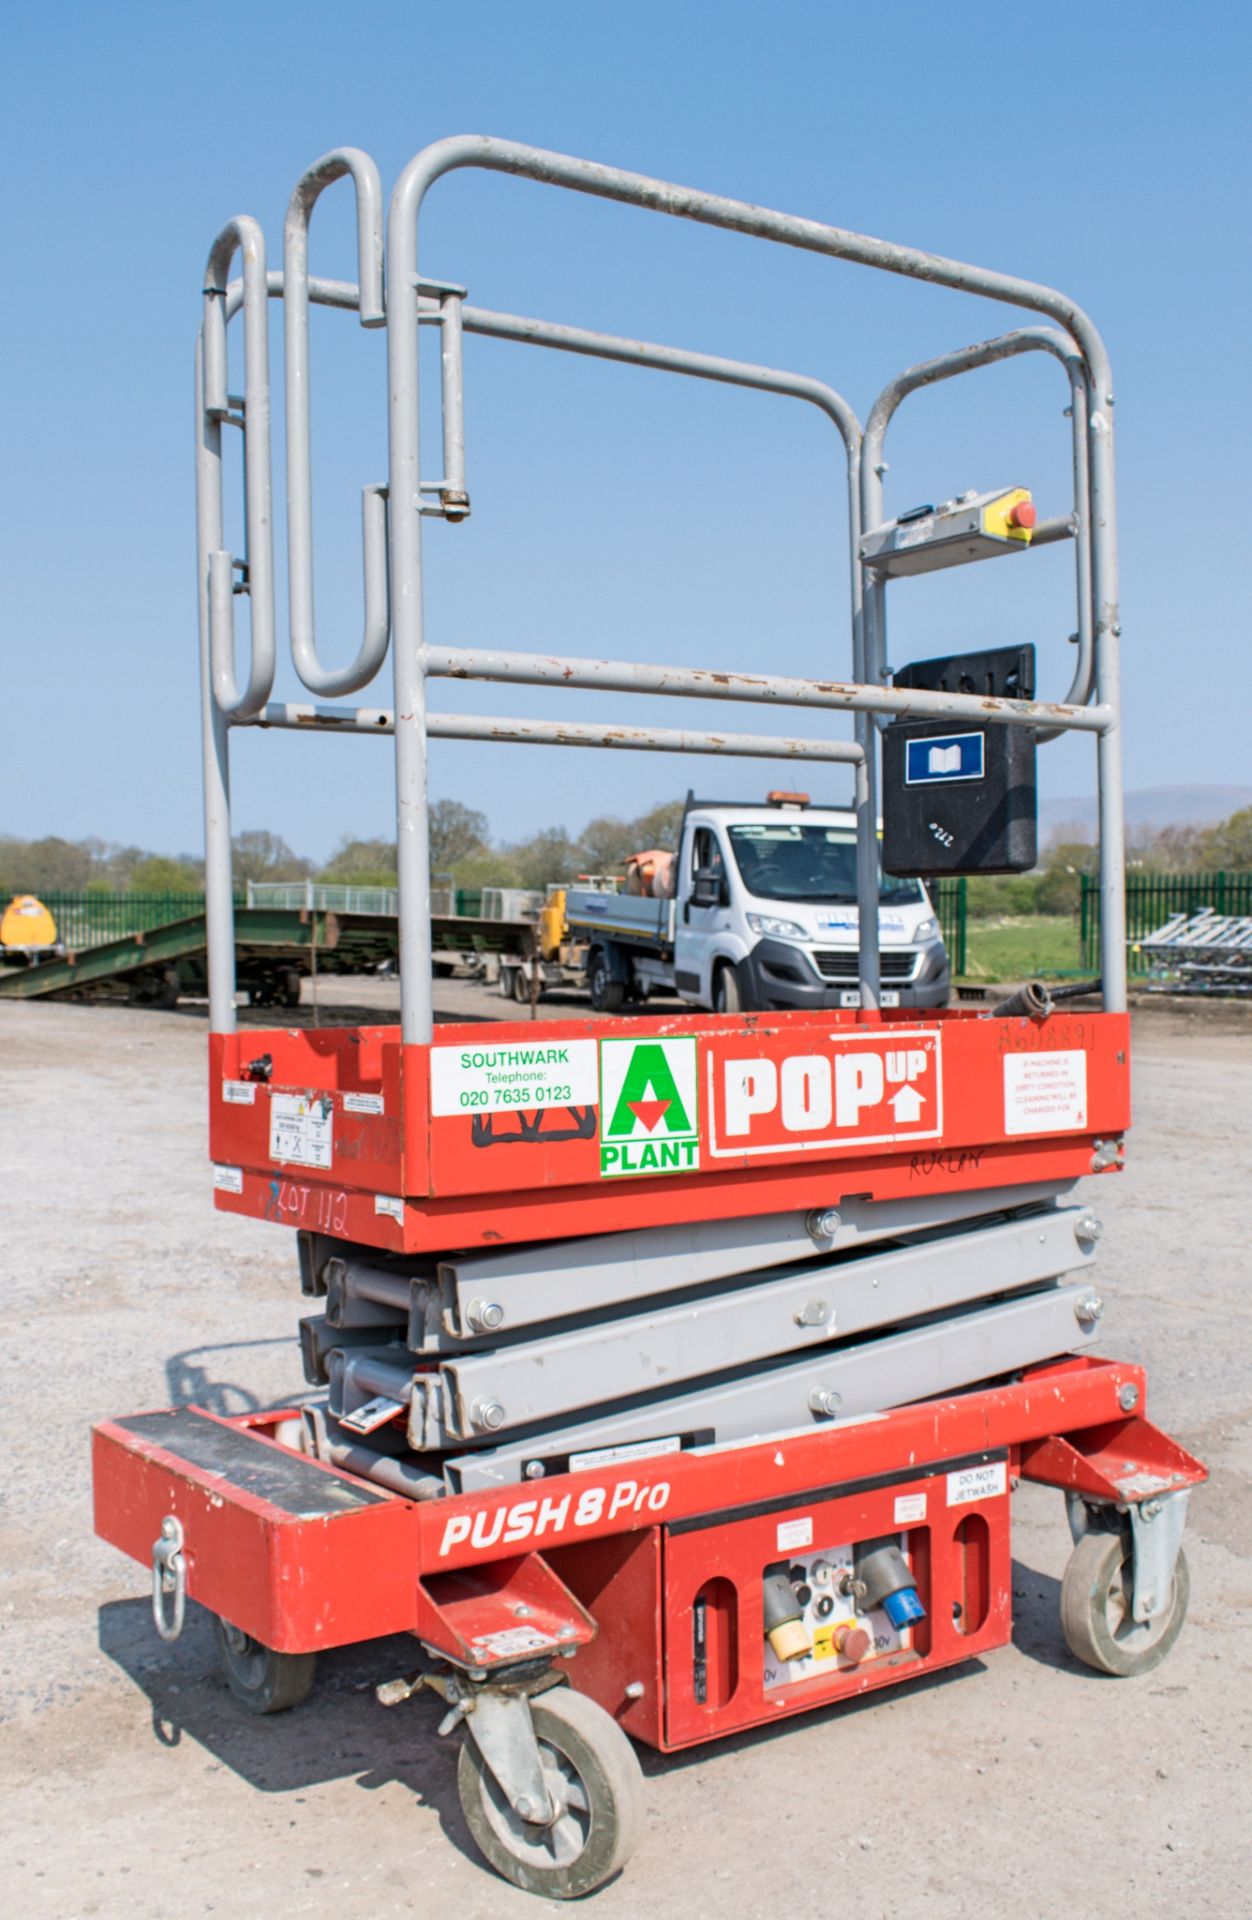 Push 8 Pro battery electric scissor lift Year: 2013 A60889 - Image 3 of 4